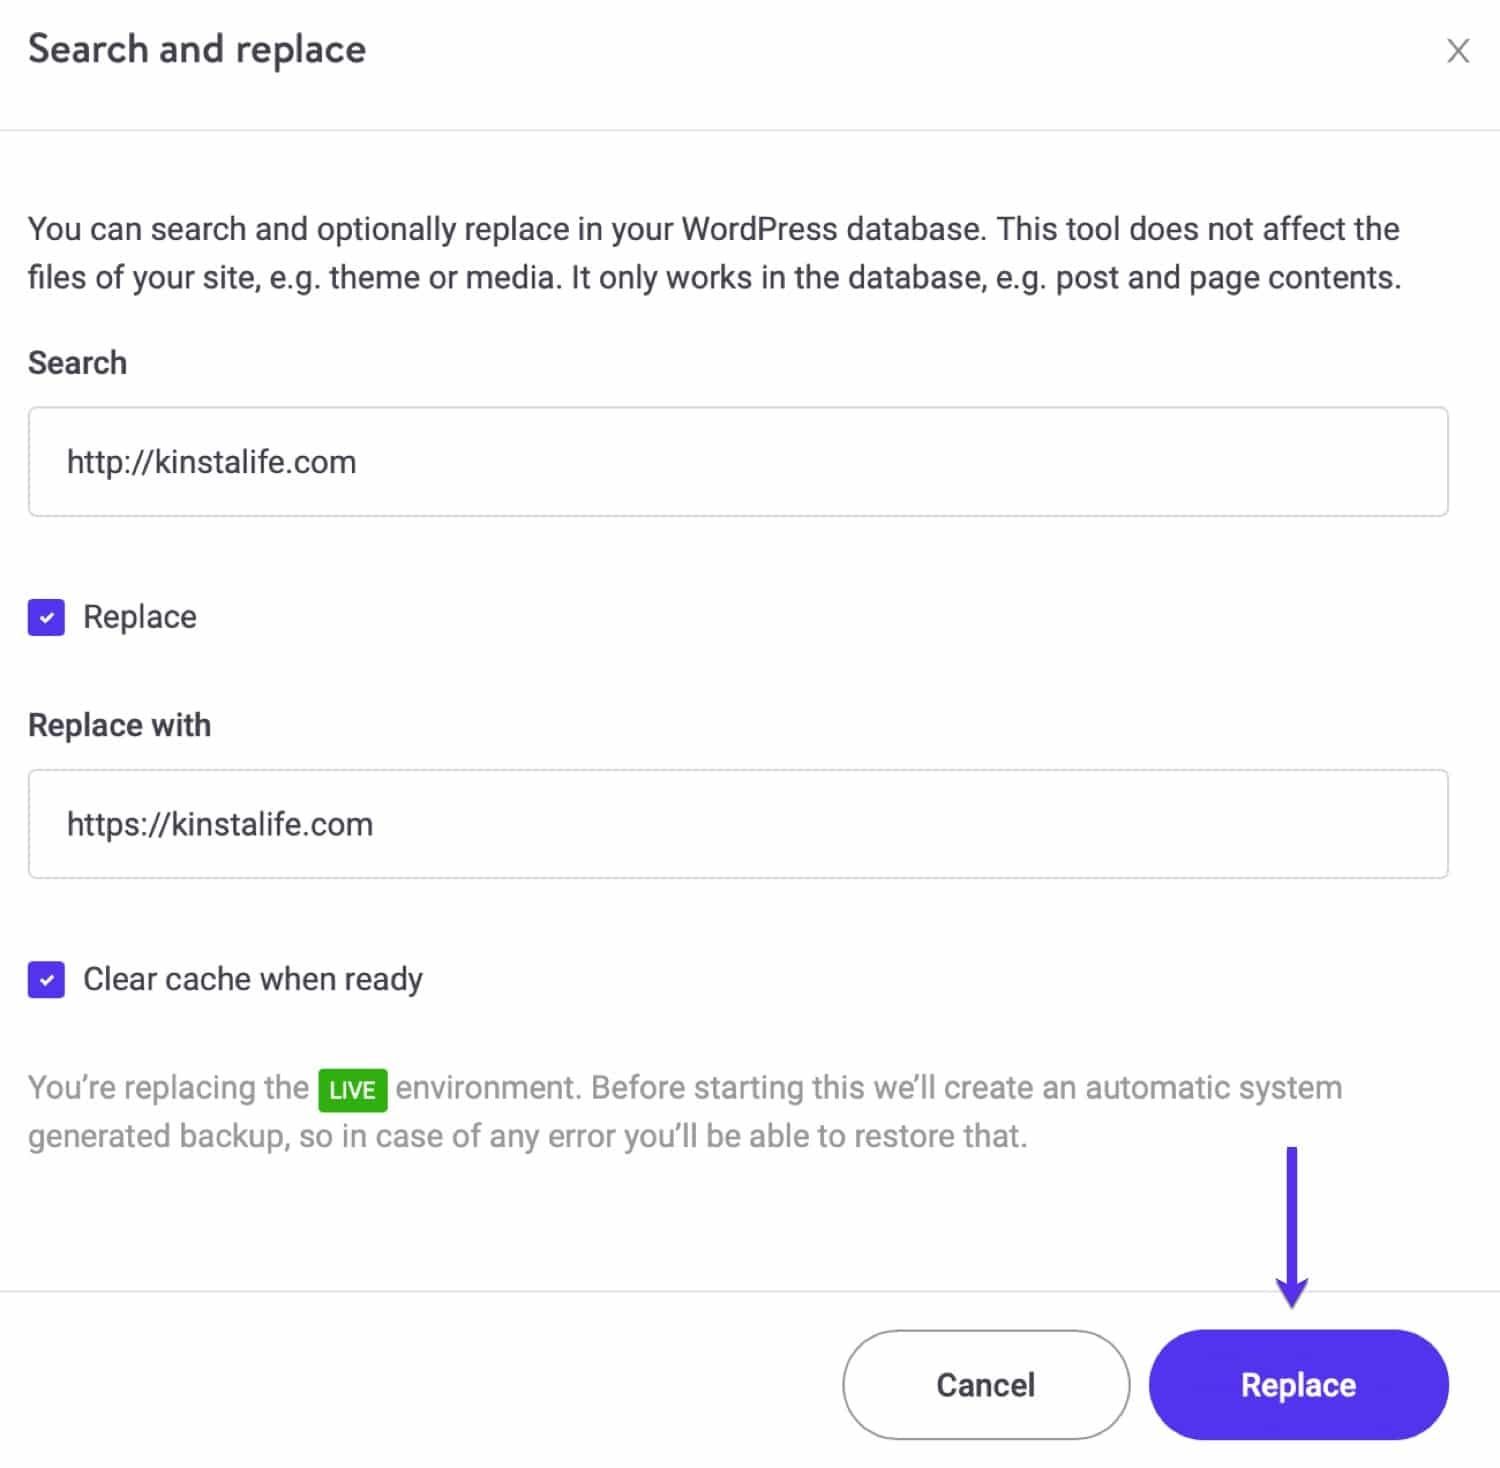 Using Kinsta's 'Search and replace' tool in MyKinsta.